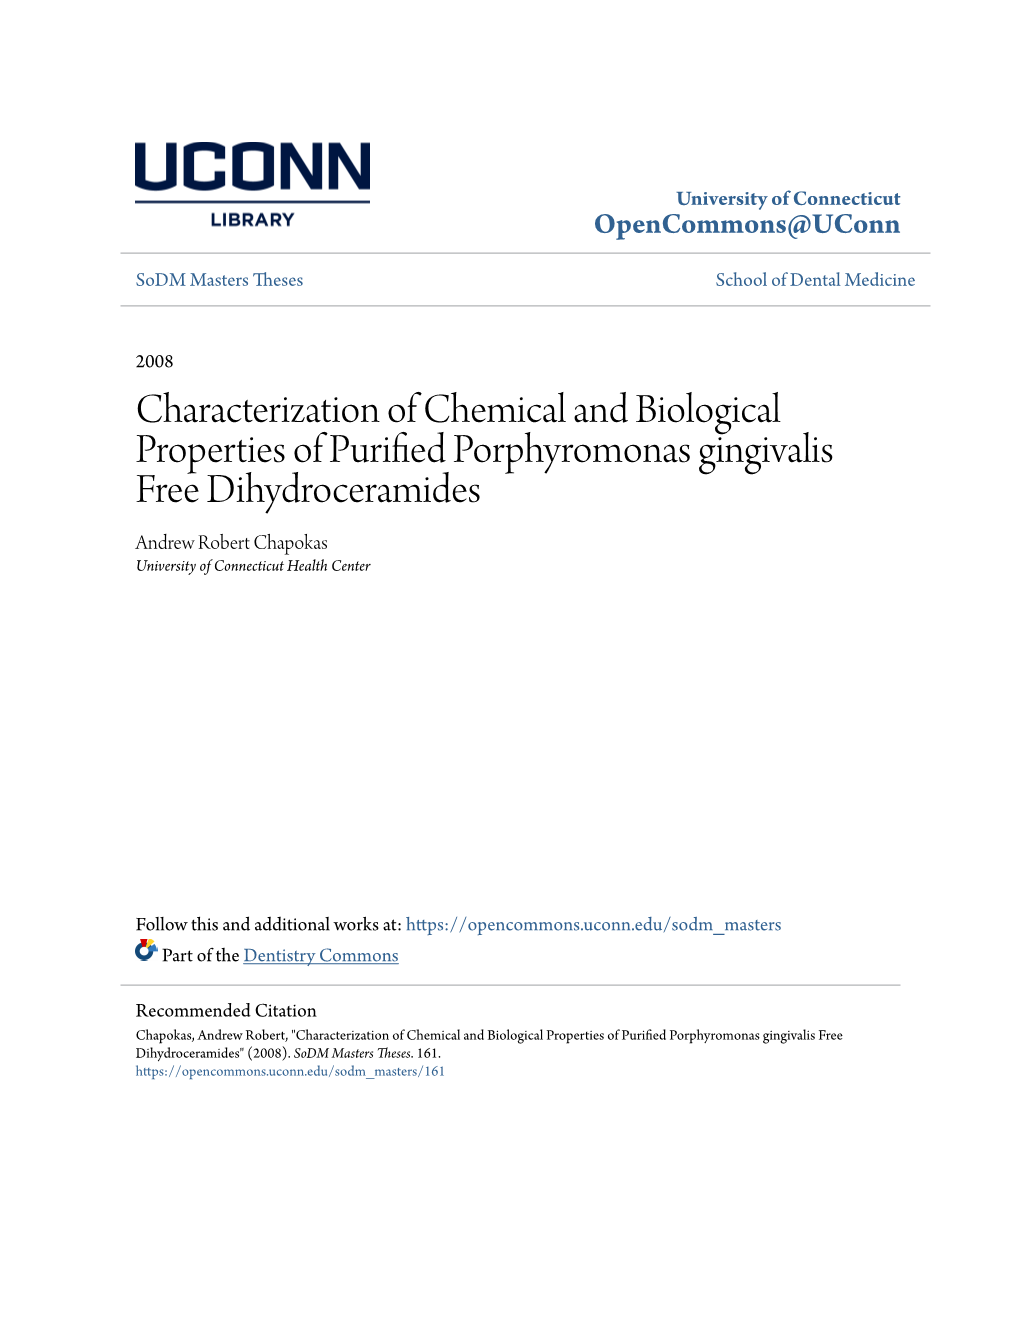 Characterization of Chemical and Biological Properties of Purified